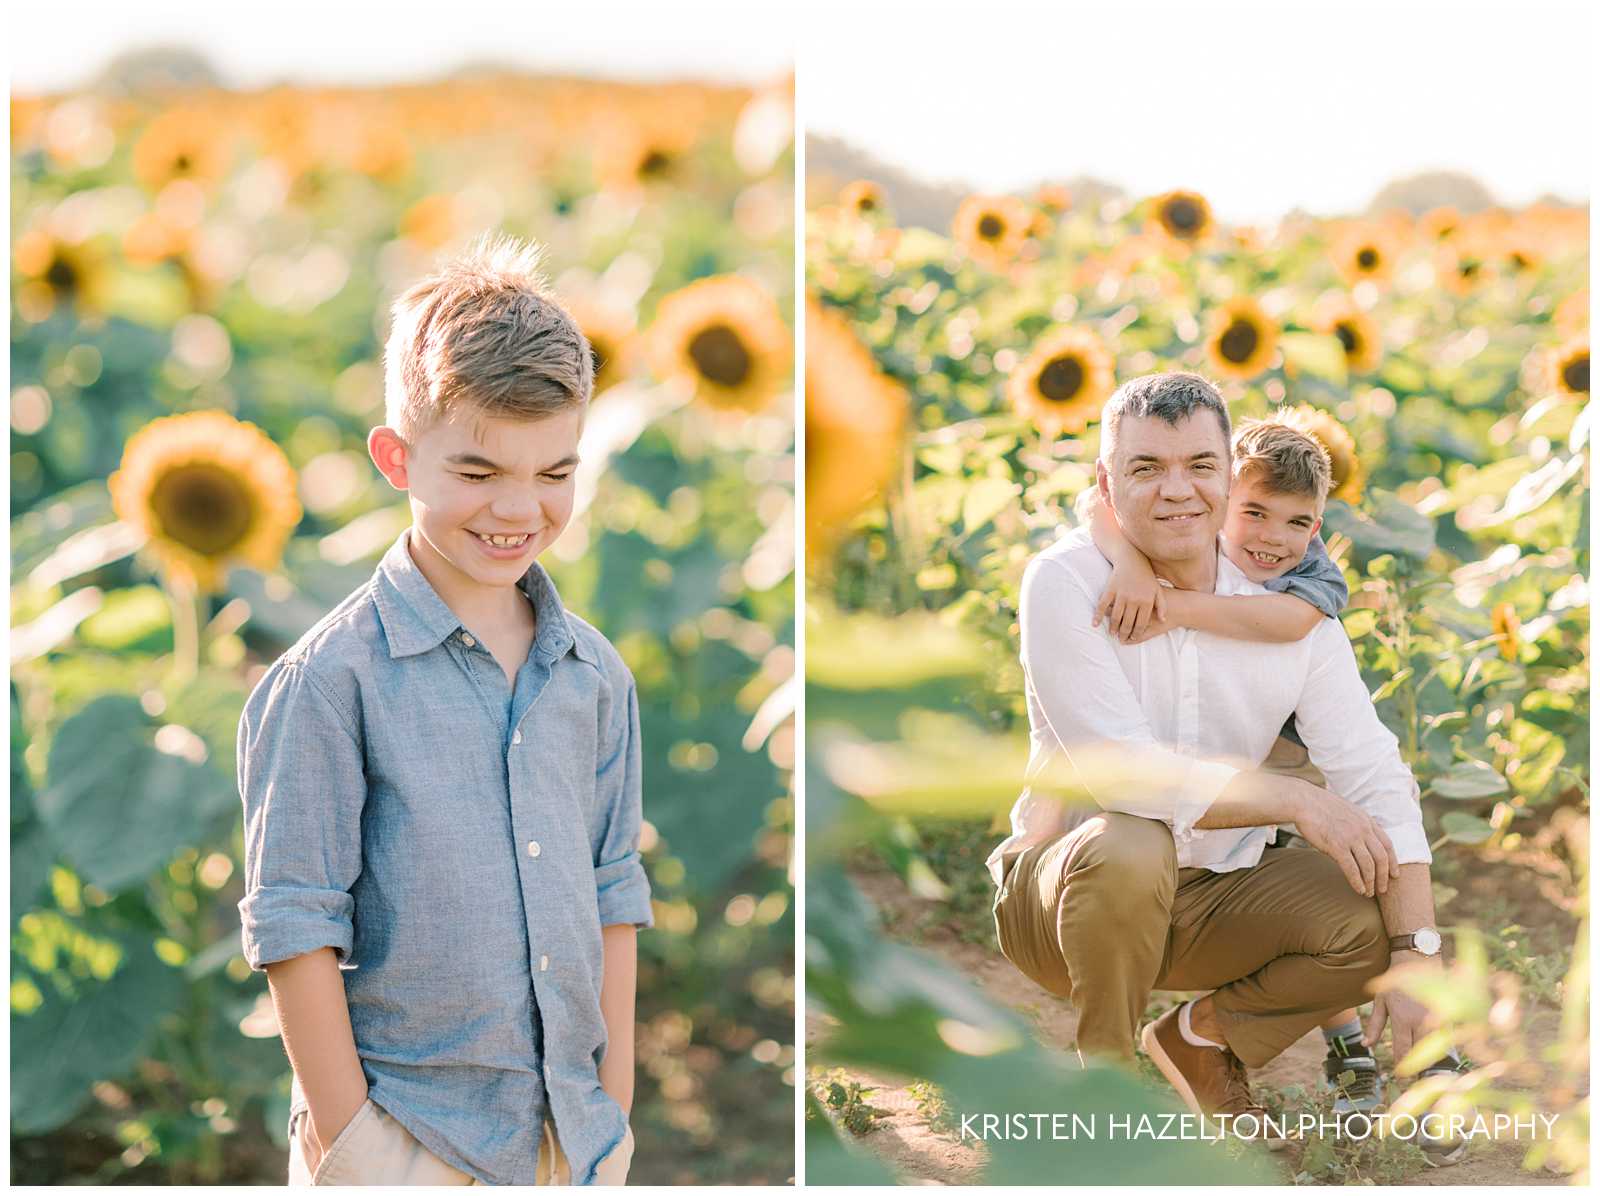 sunflower picture ideas: boy hugging his father's neck in a empty space in a field of sunflowers